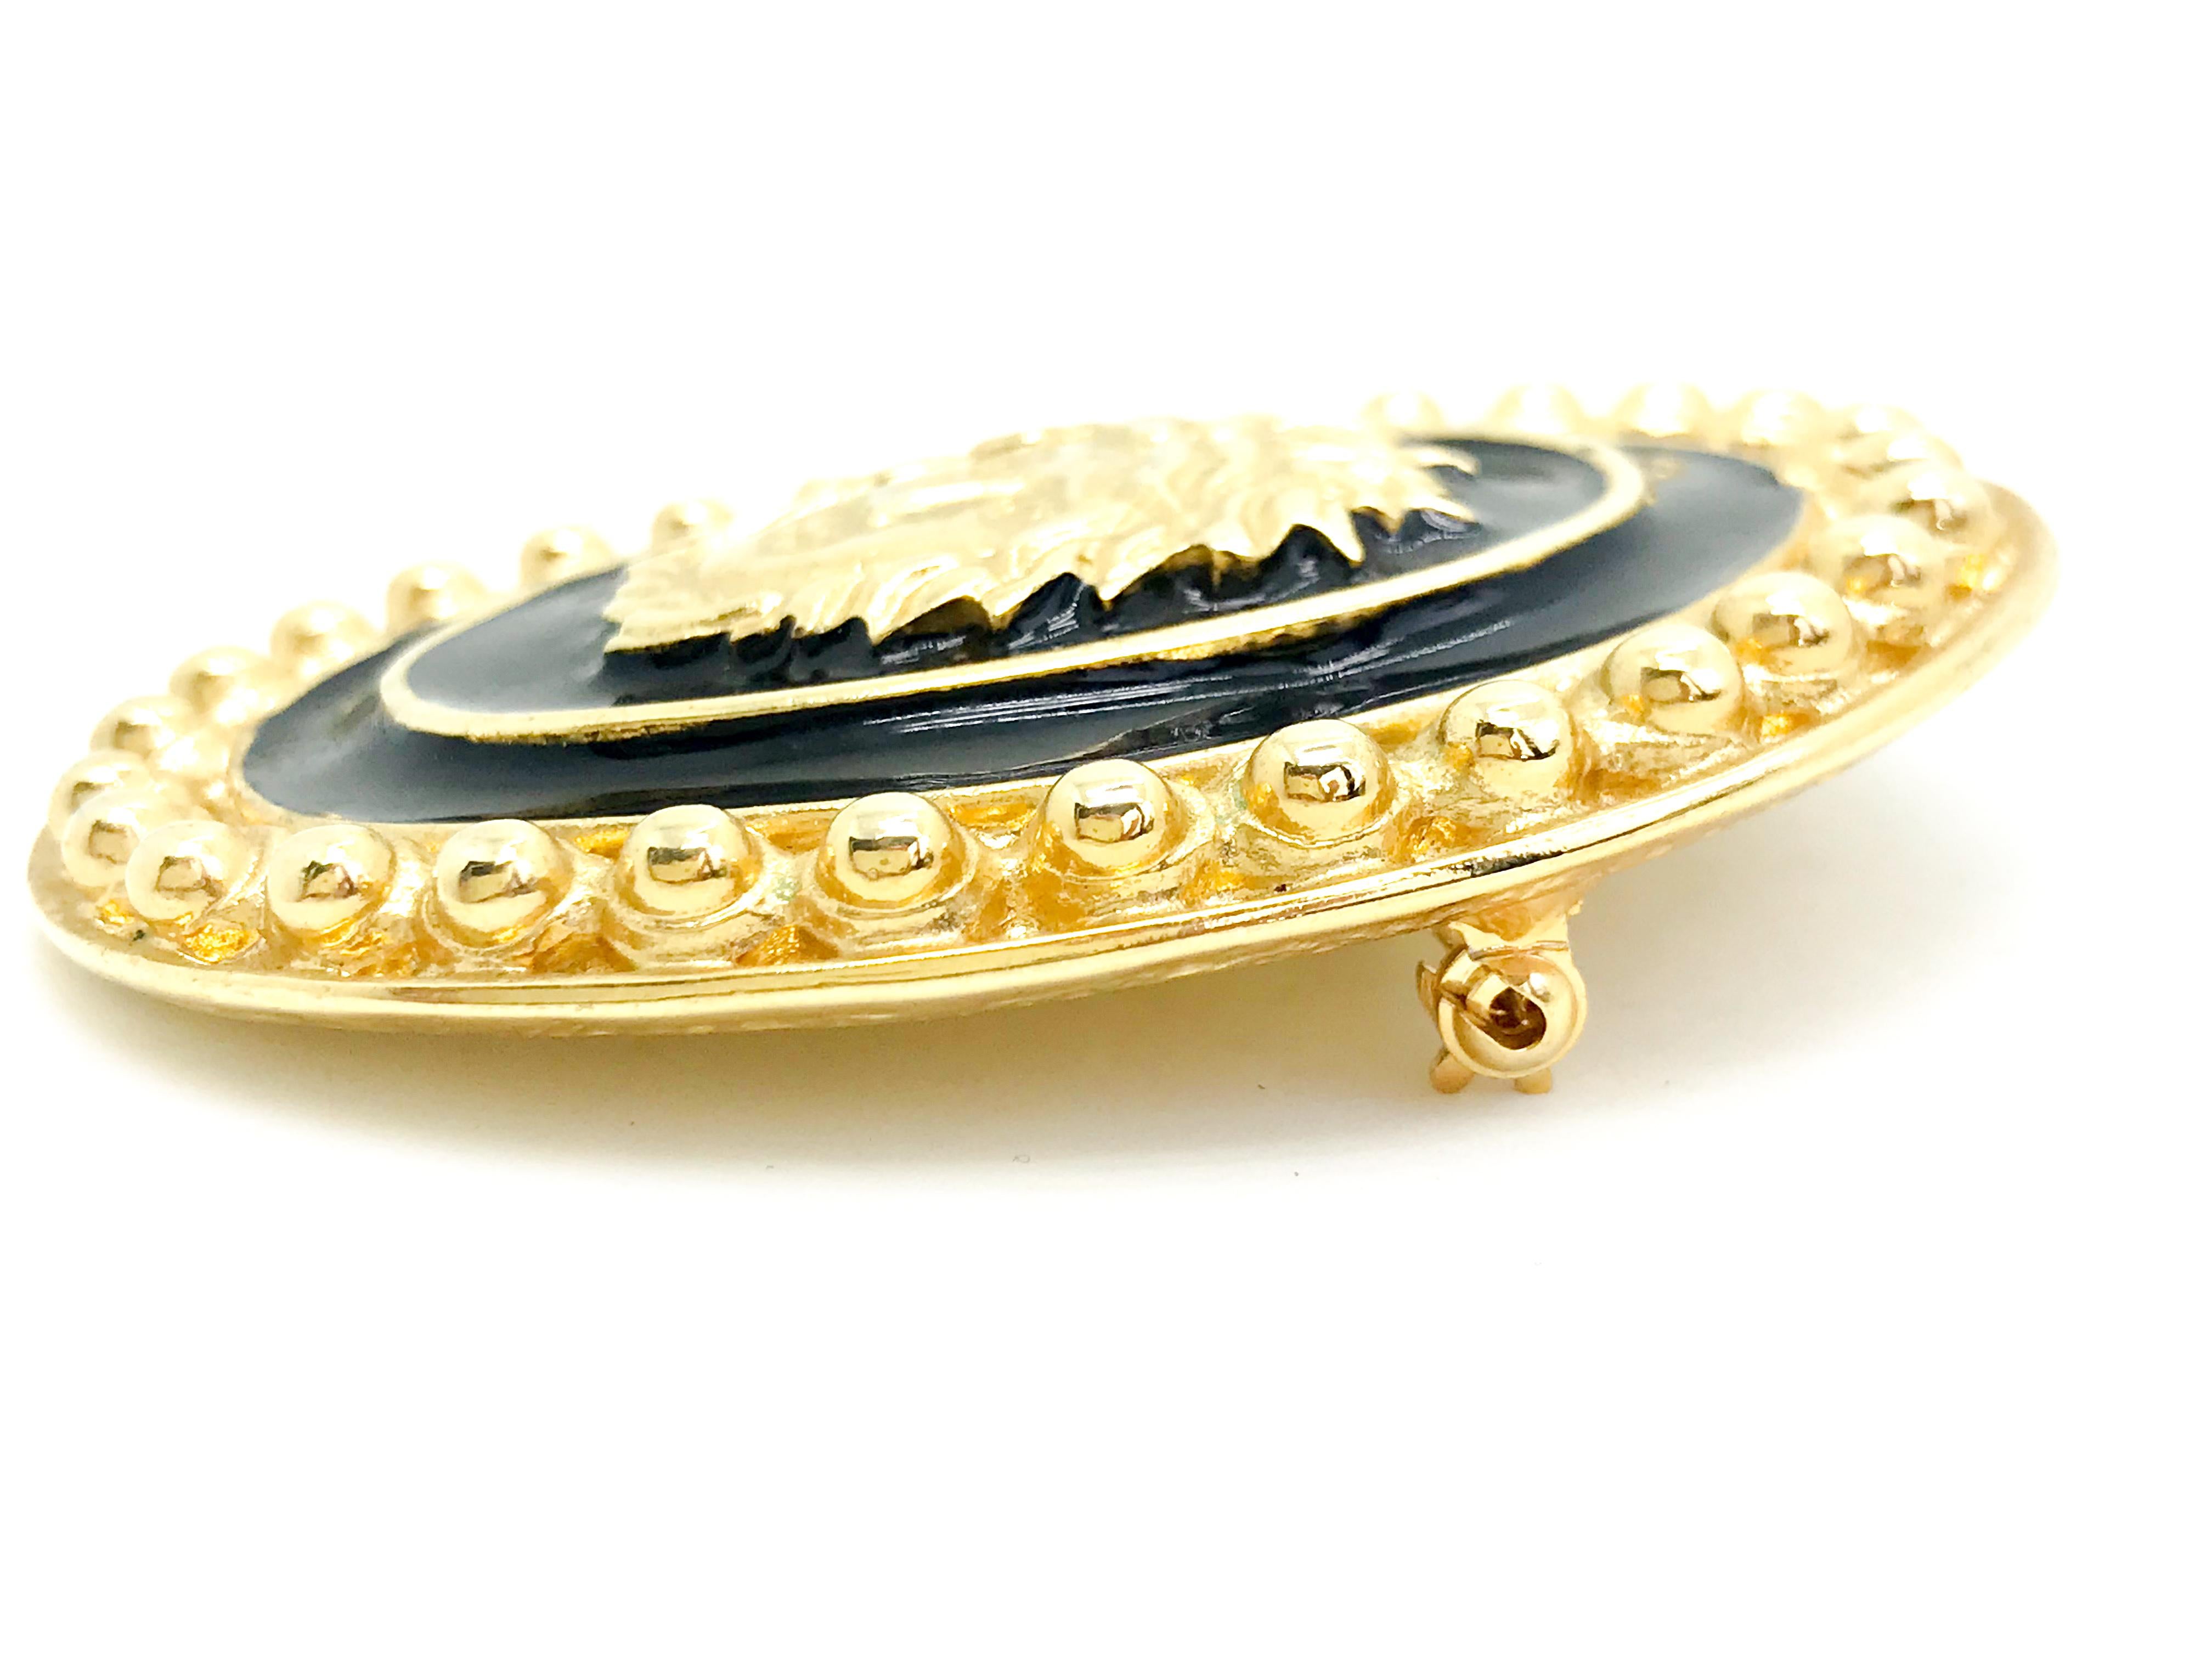 Gianni Versace 1980s Vintage Large Statement Brooch Pin  For Sale 1